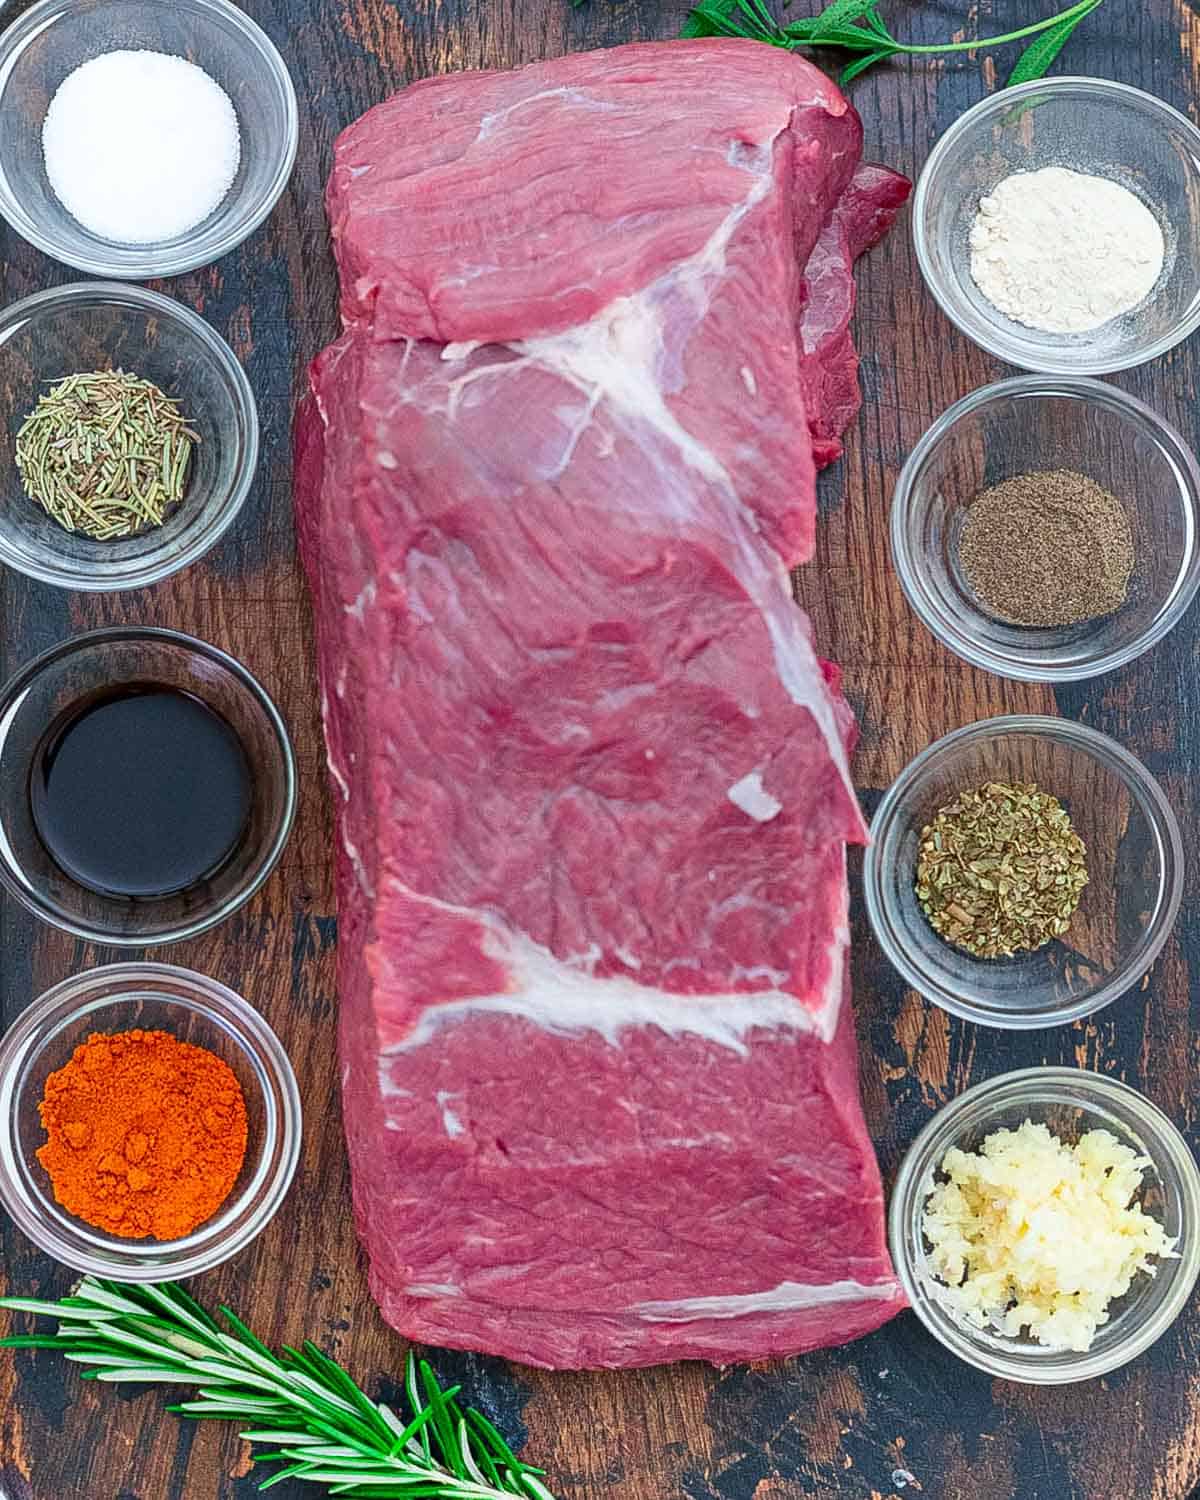 Tri tip roast on a cutting board with seasonings and ingredients to make in the slow cooker.